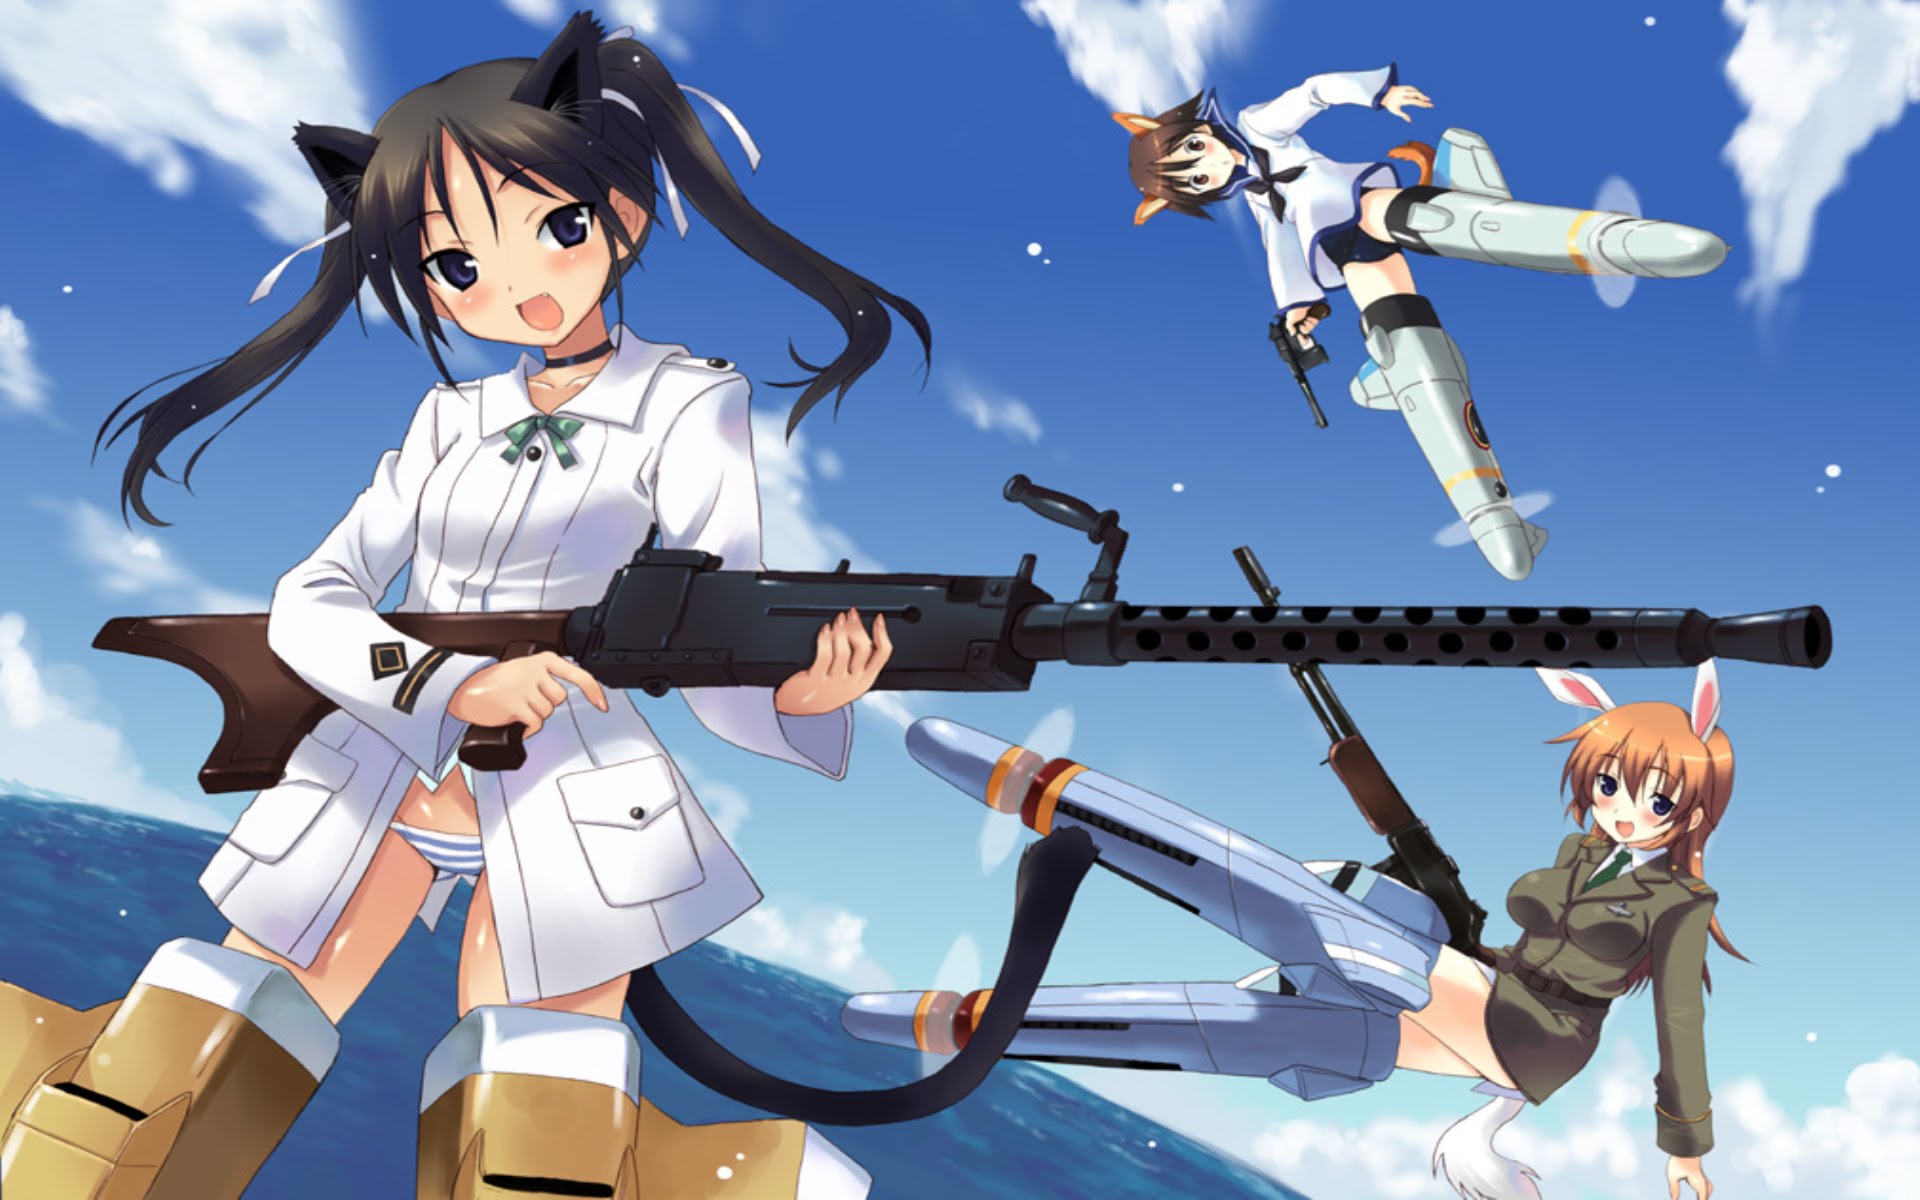 Strike Witches #3